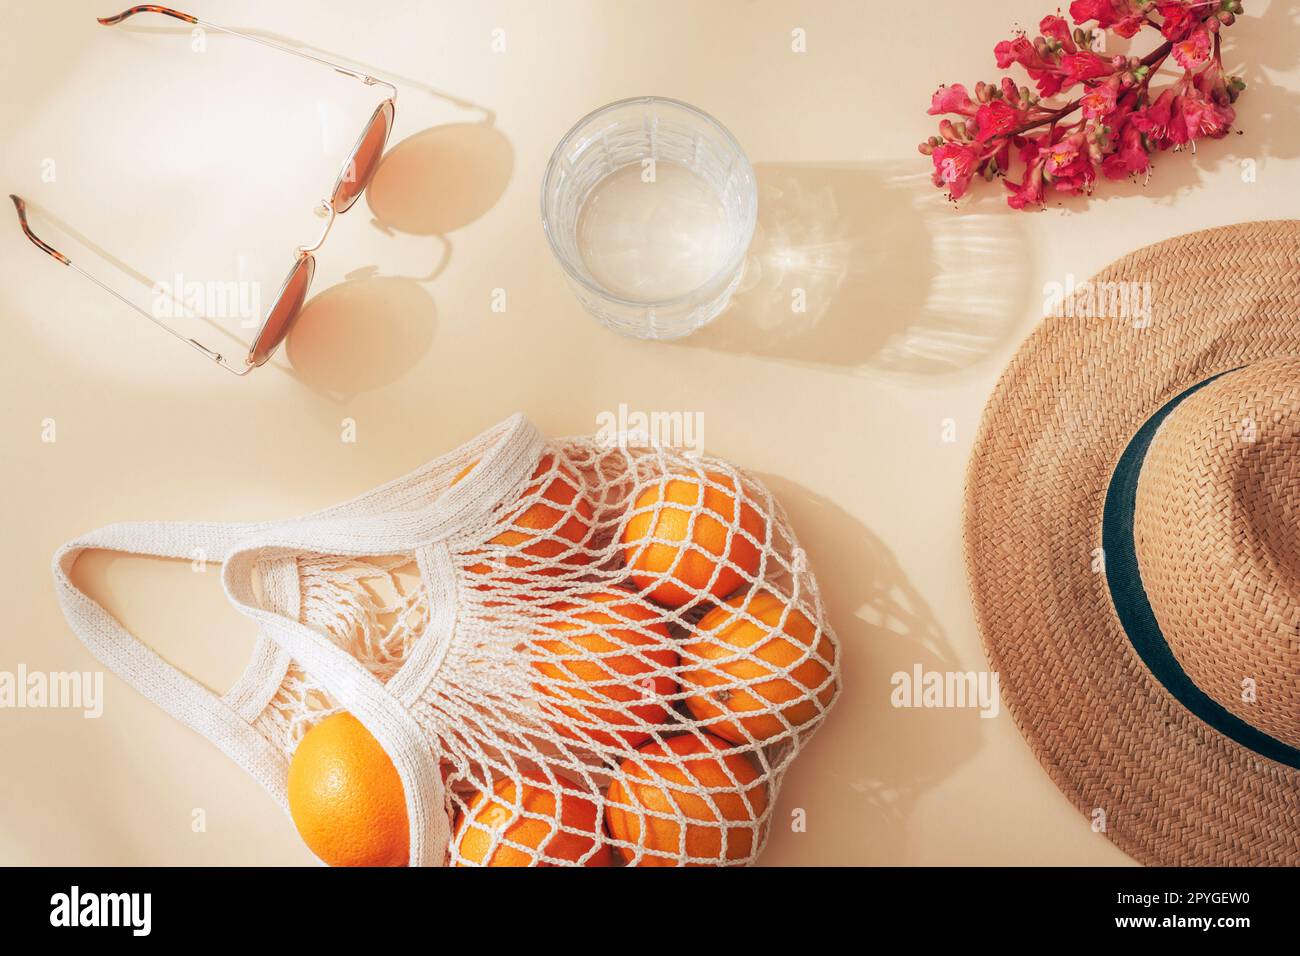 Straw hat, sunglasses, glass of water, string bag with oranges and red flower on beige background in sunlight. Summer concept. Top view, flat lay. Stock Photo